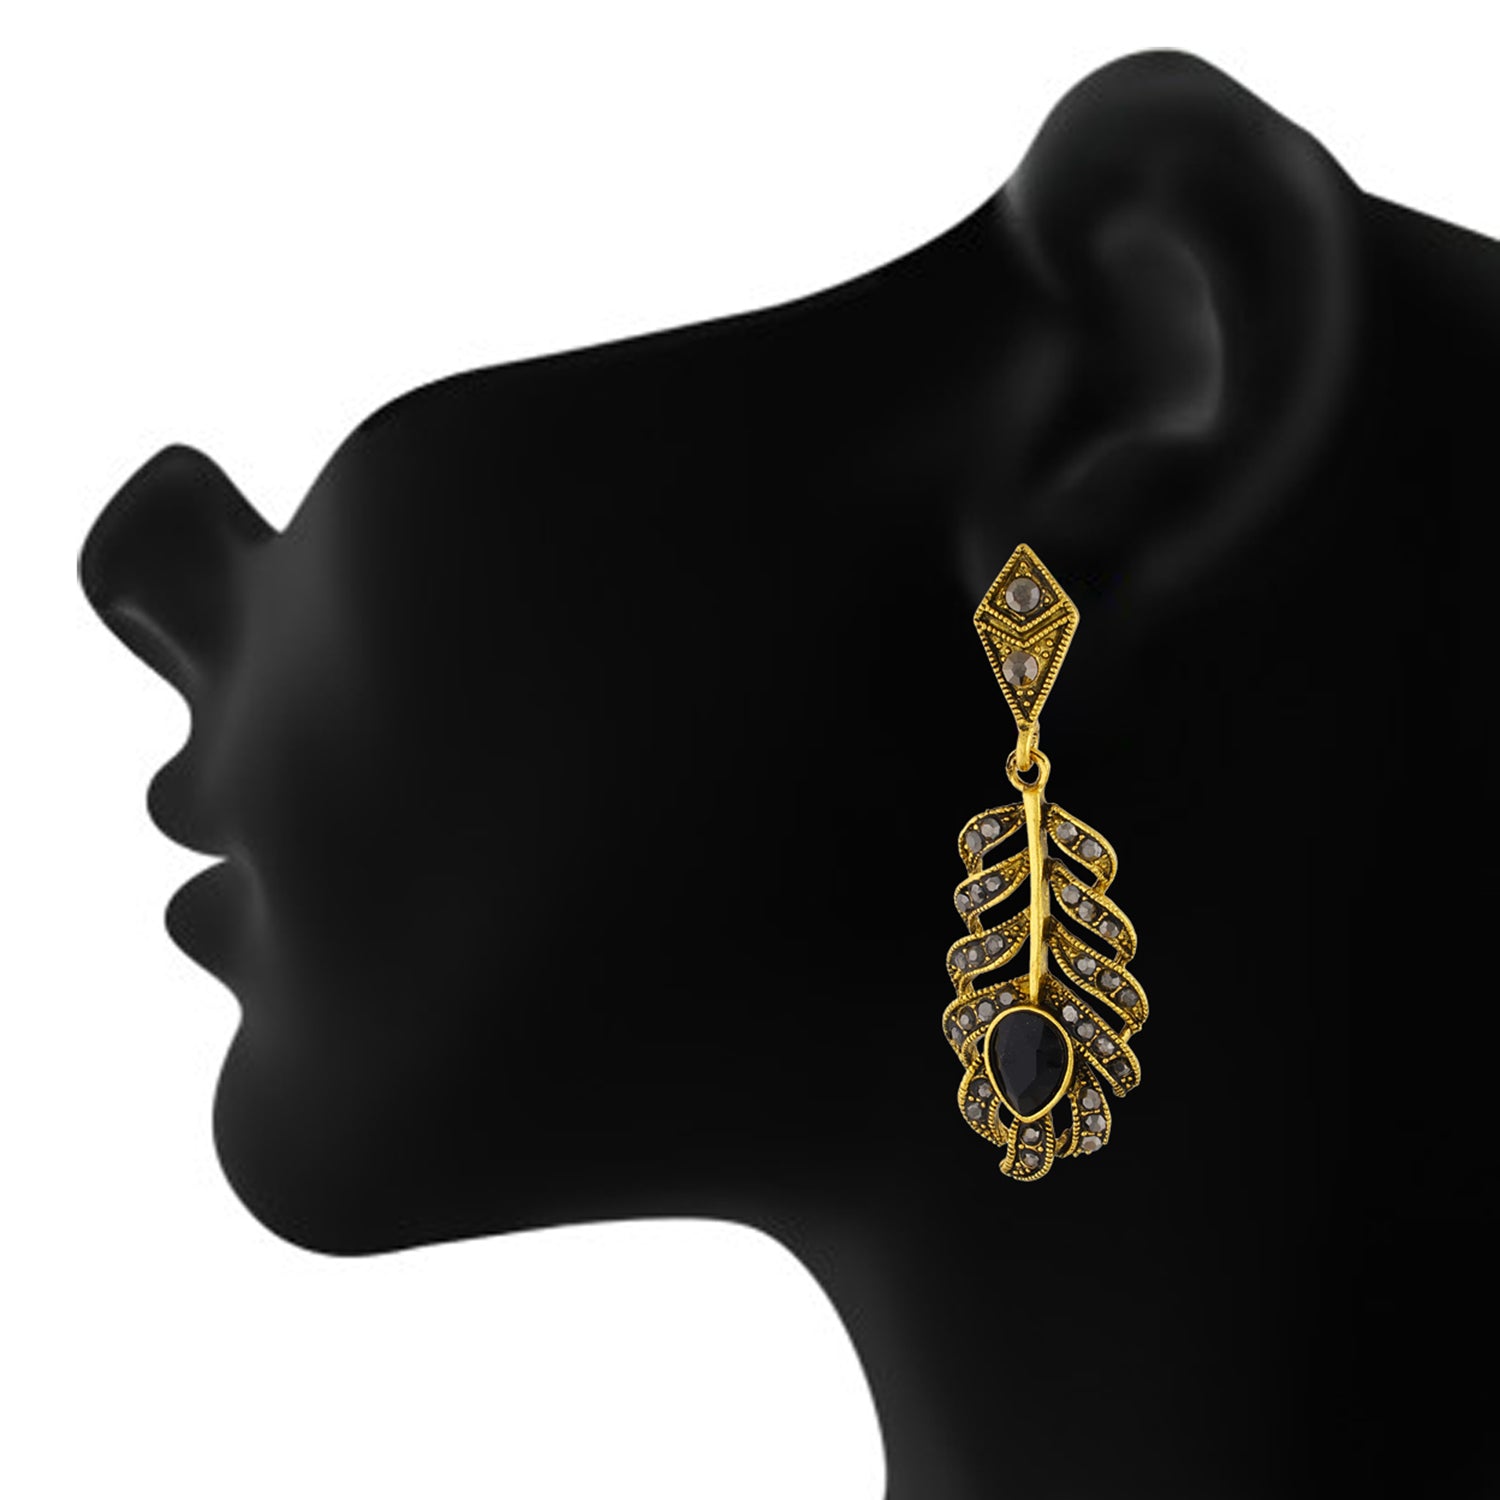 Spectacular Oxide Gold Colour Leaf Shape Earring for Girls and Women